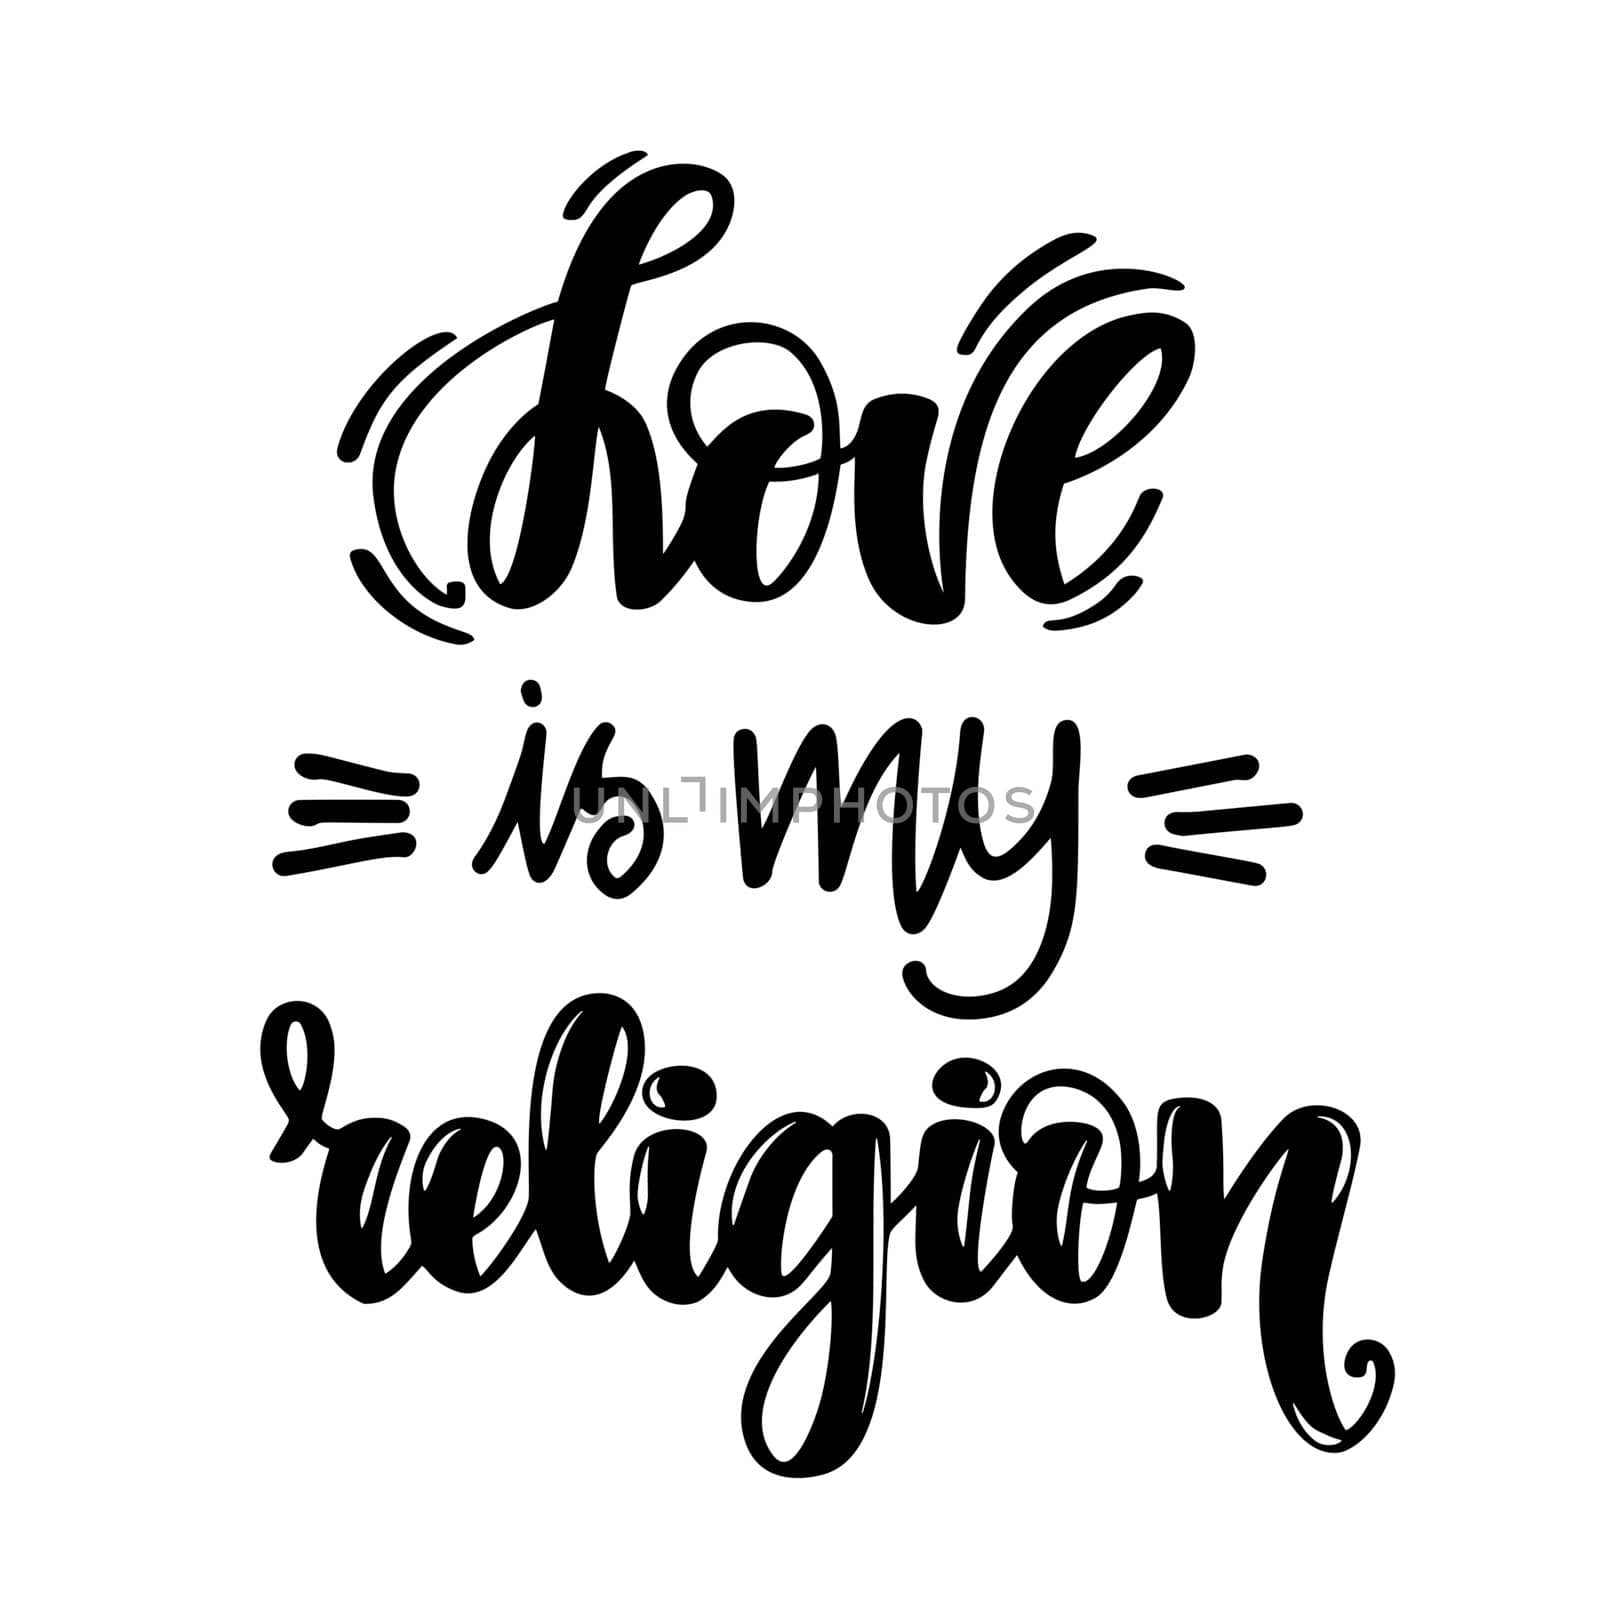 Love is my religion. Handwritten lettering on white background. illustration for posters, cards, print on t-shirts and much more.